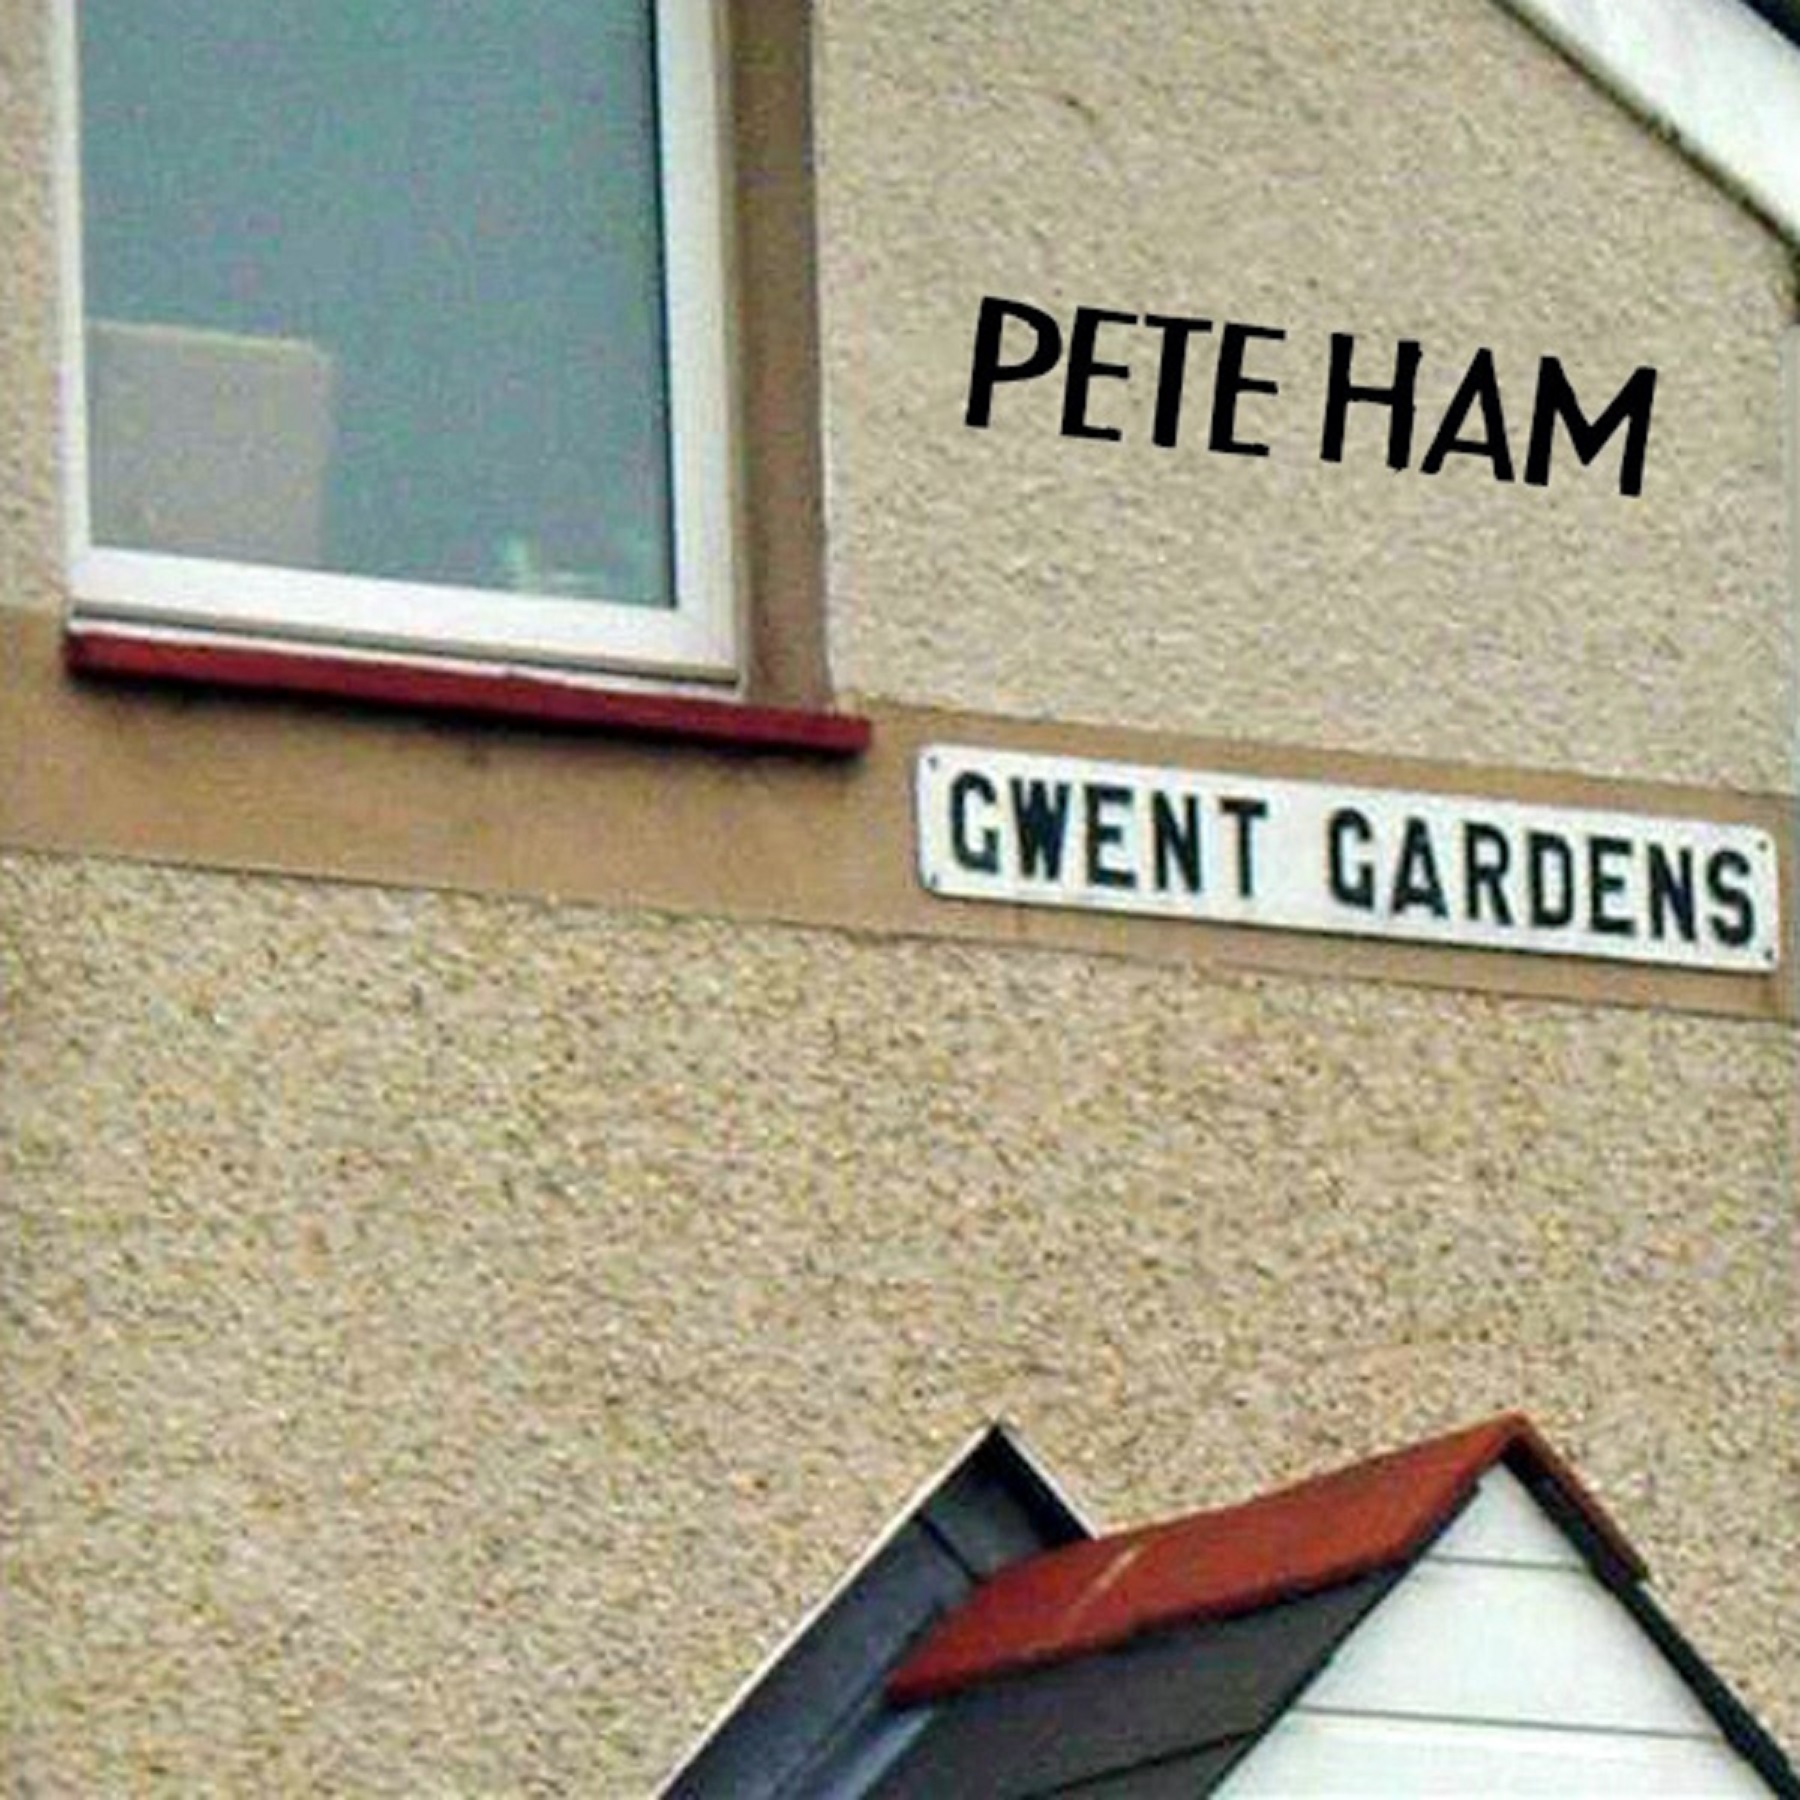 Badfinger Legend Pete Ham’s Legacy Shines On With the Release of “Gwent Gardens”, February 23rd on Y&T Music